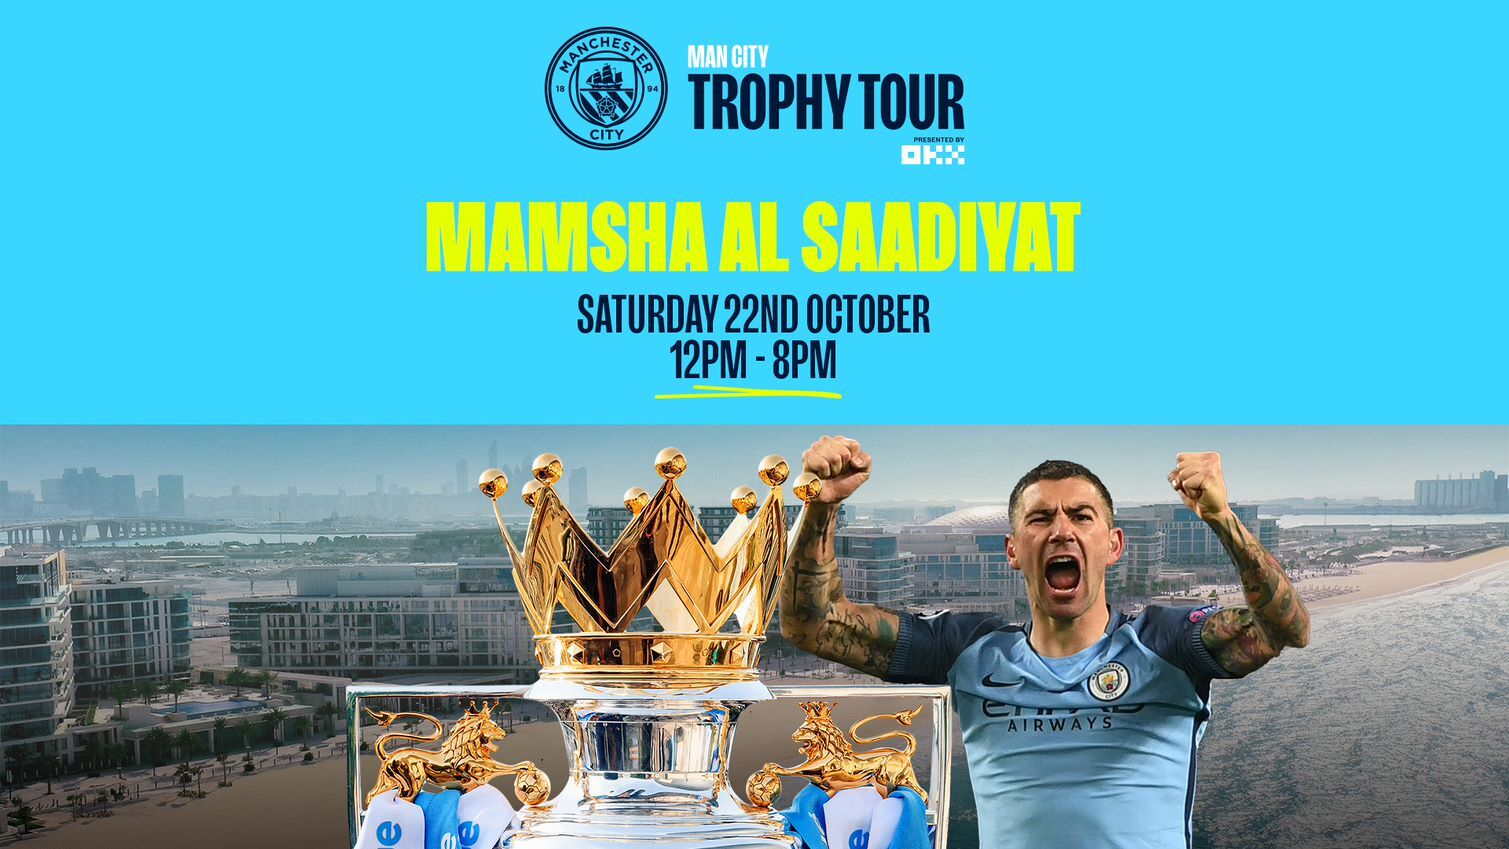 Manchester City’s Global Trophy Tour Heading To Abu Dhabi